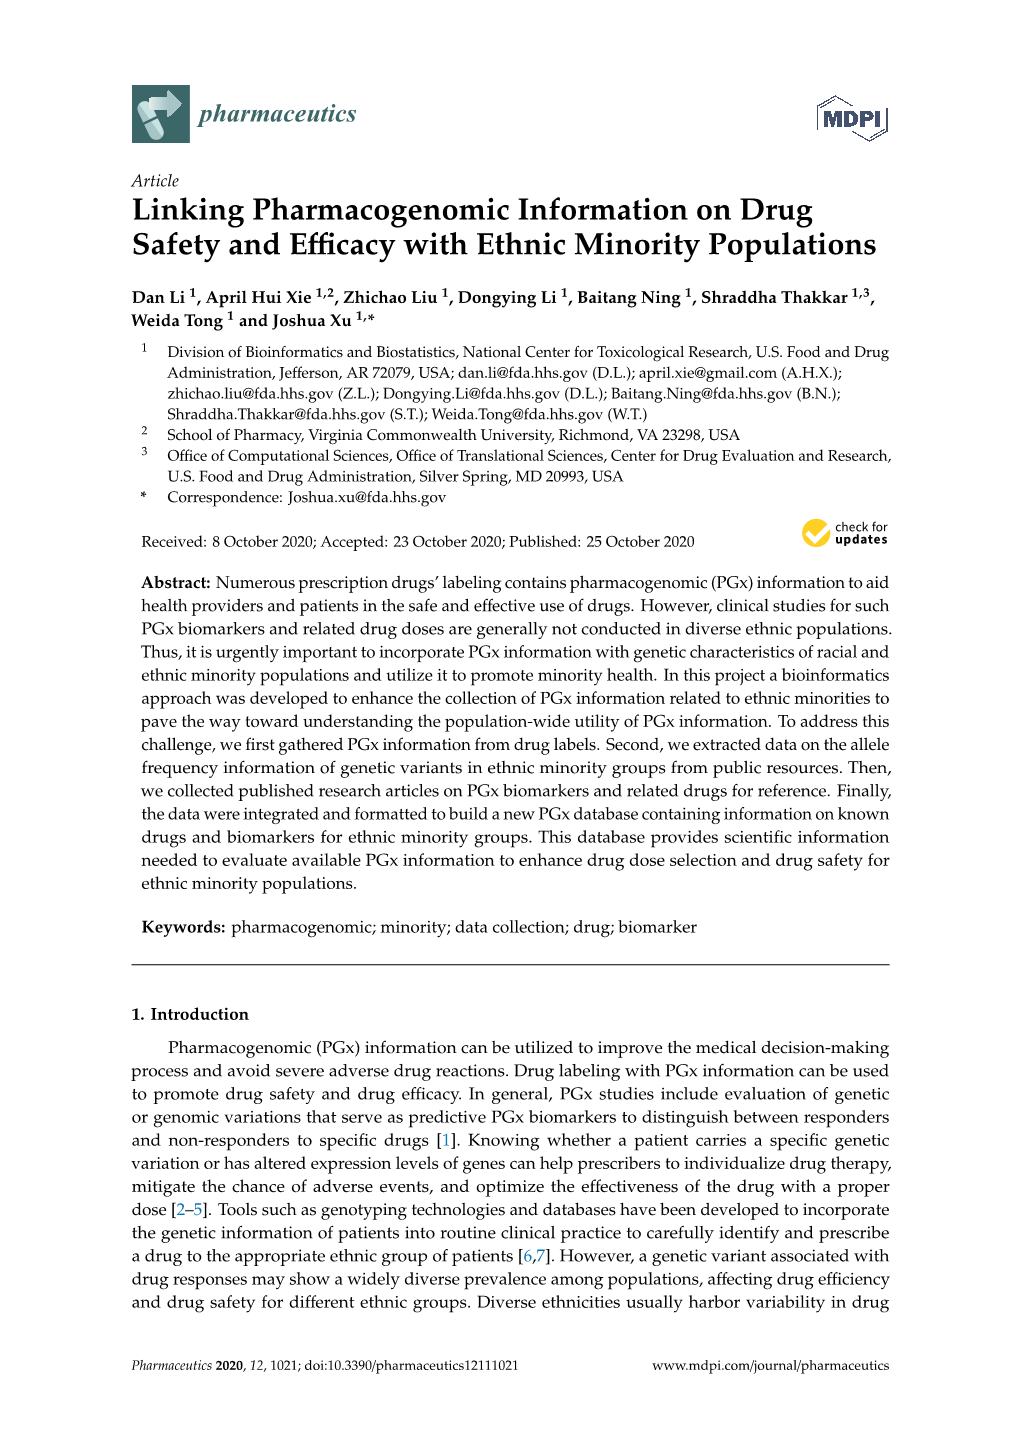 Linking Pharmacogenomic Information on Drug Safety and Eﬃcacy with Ethnic Minority Populations